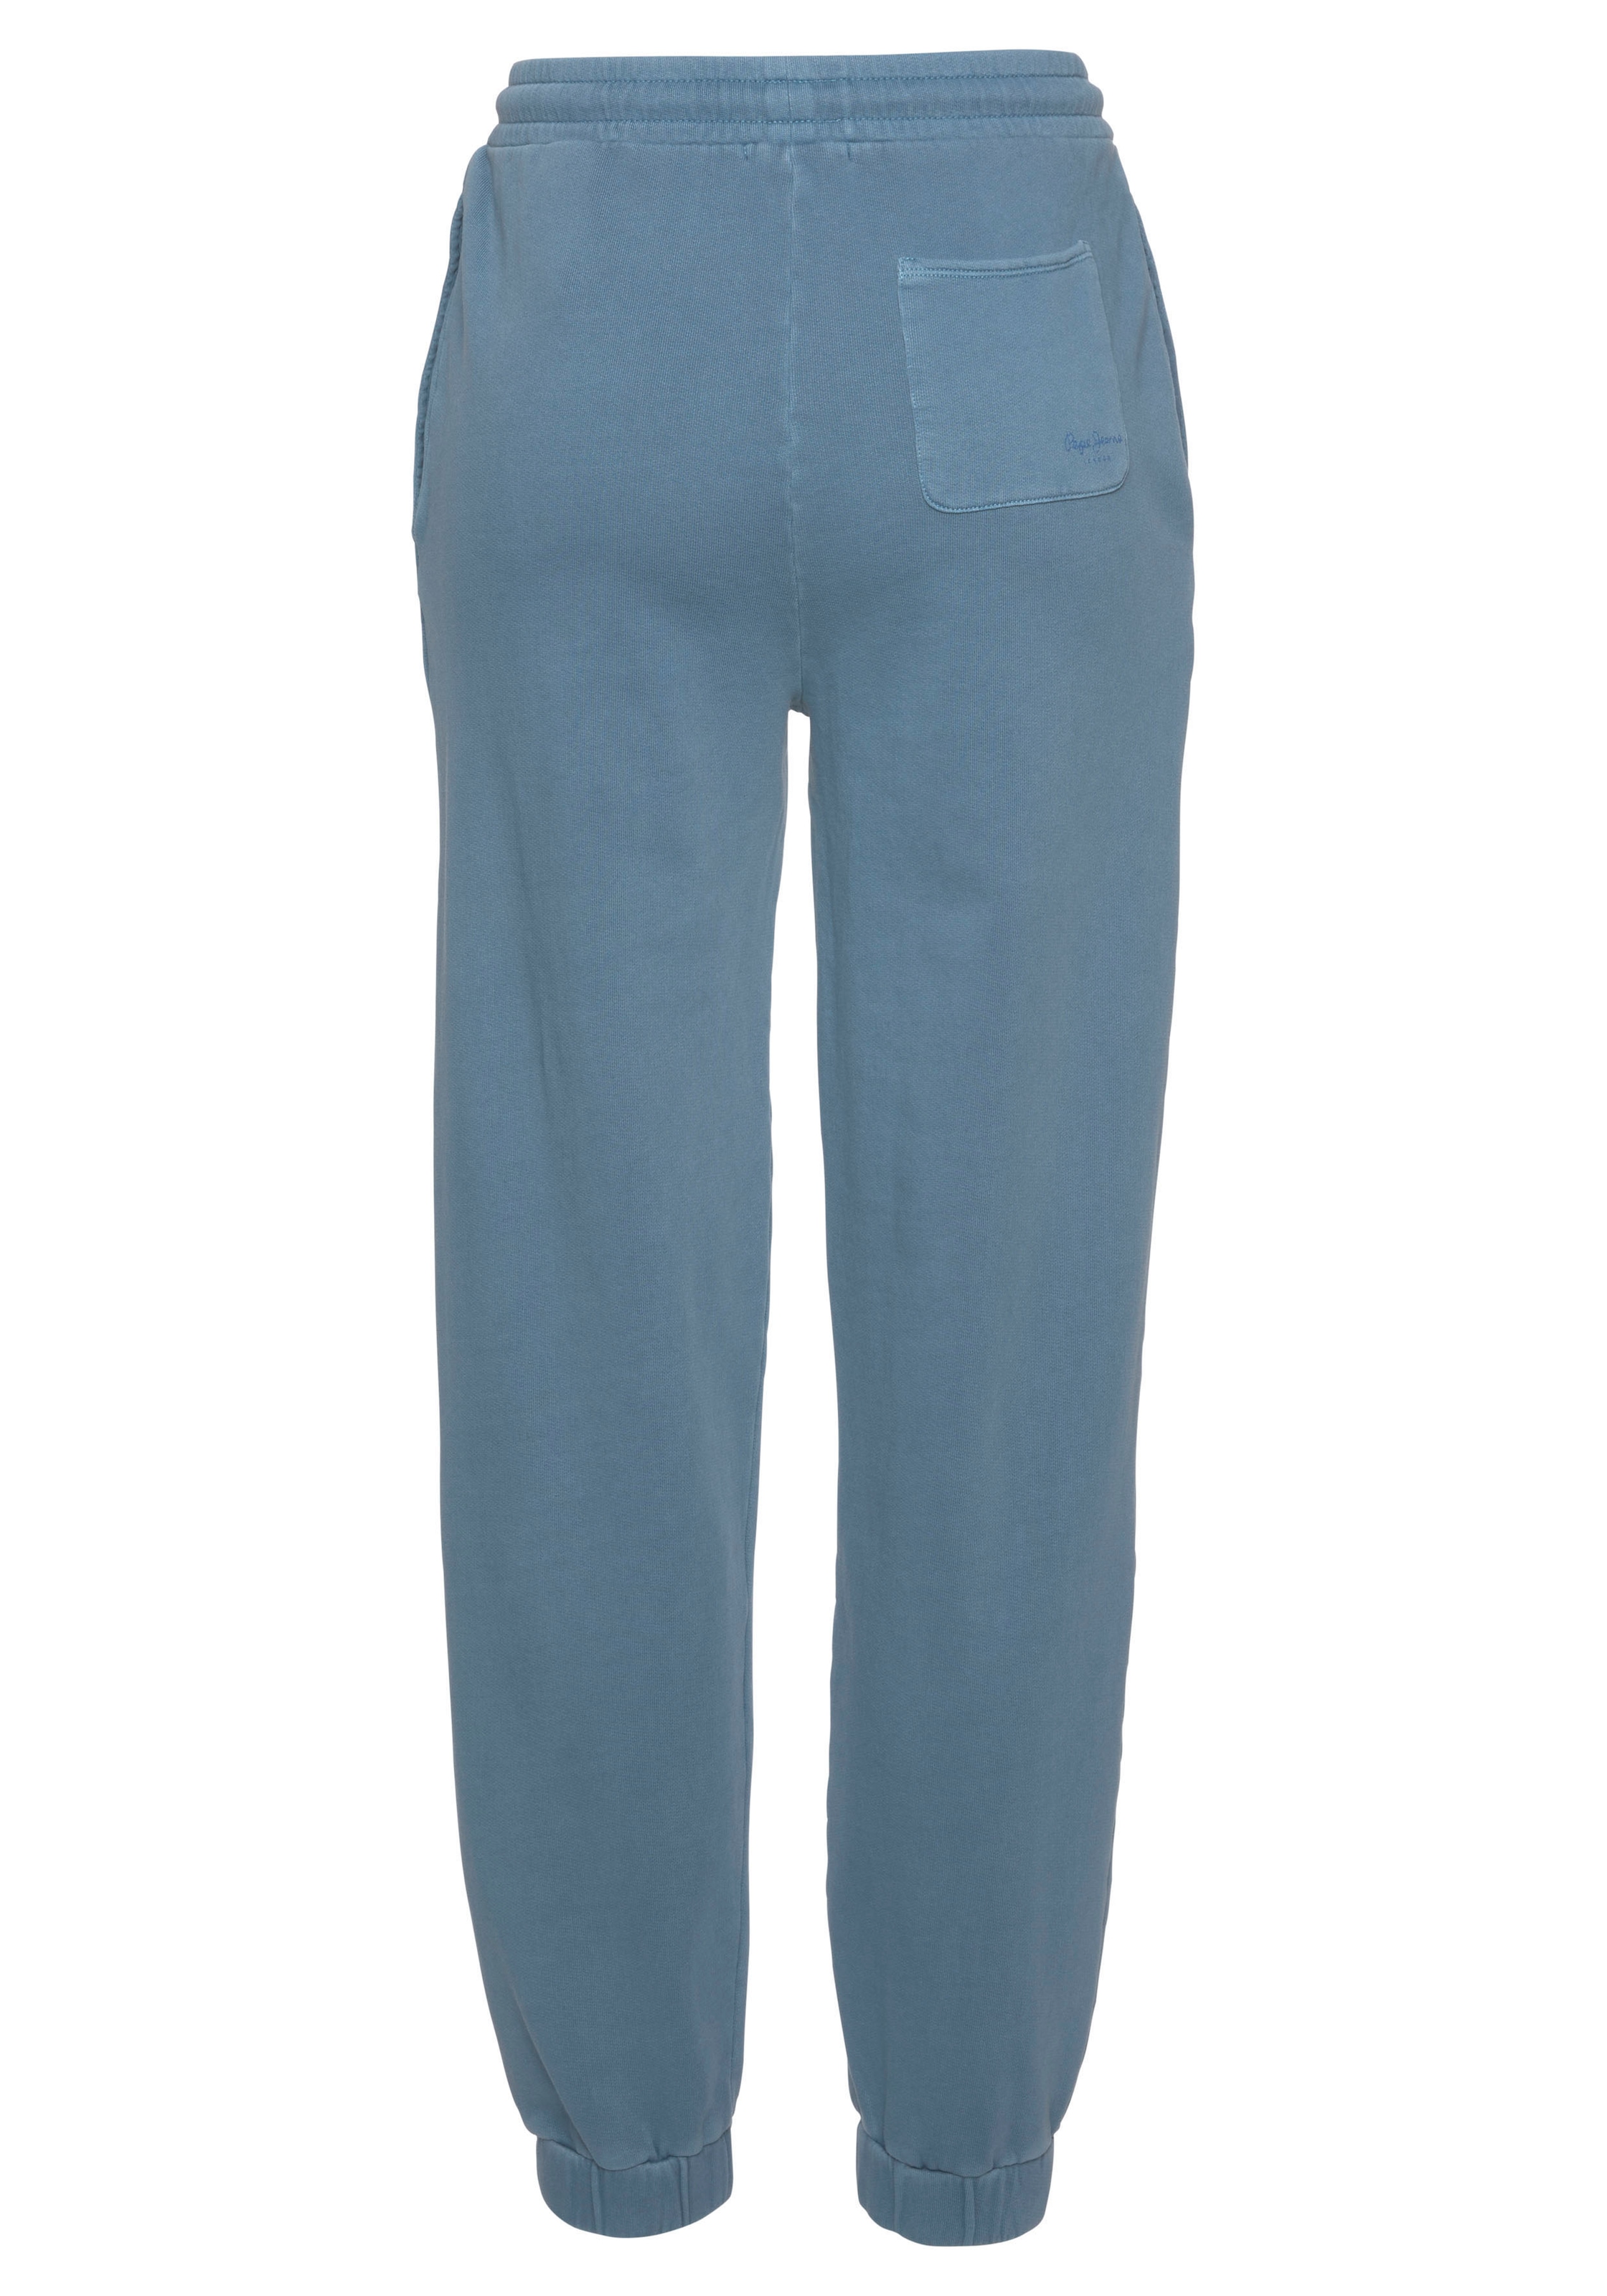 Jogger Passform bei »AUDREY«, entspannter mit Jeans Kordelzug Pepe Pants ♕ in